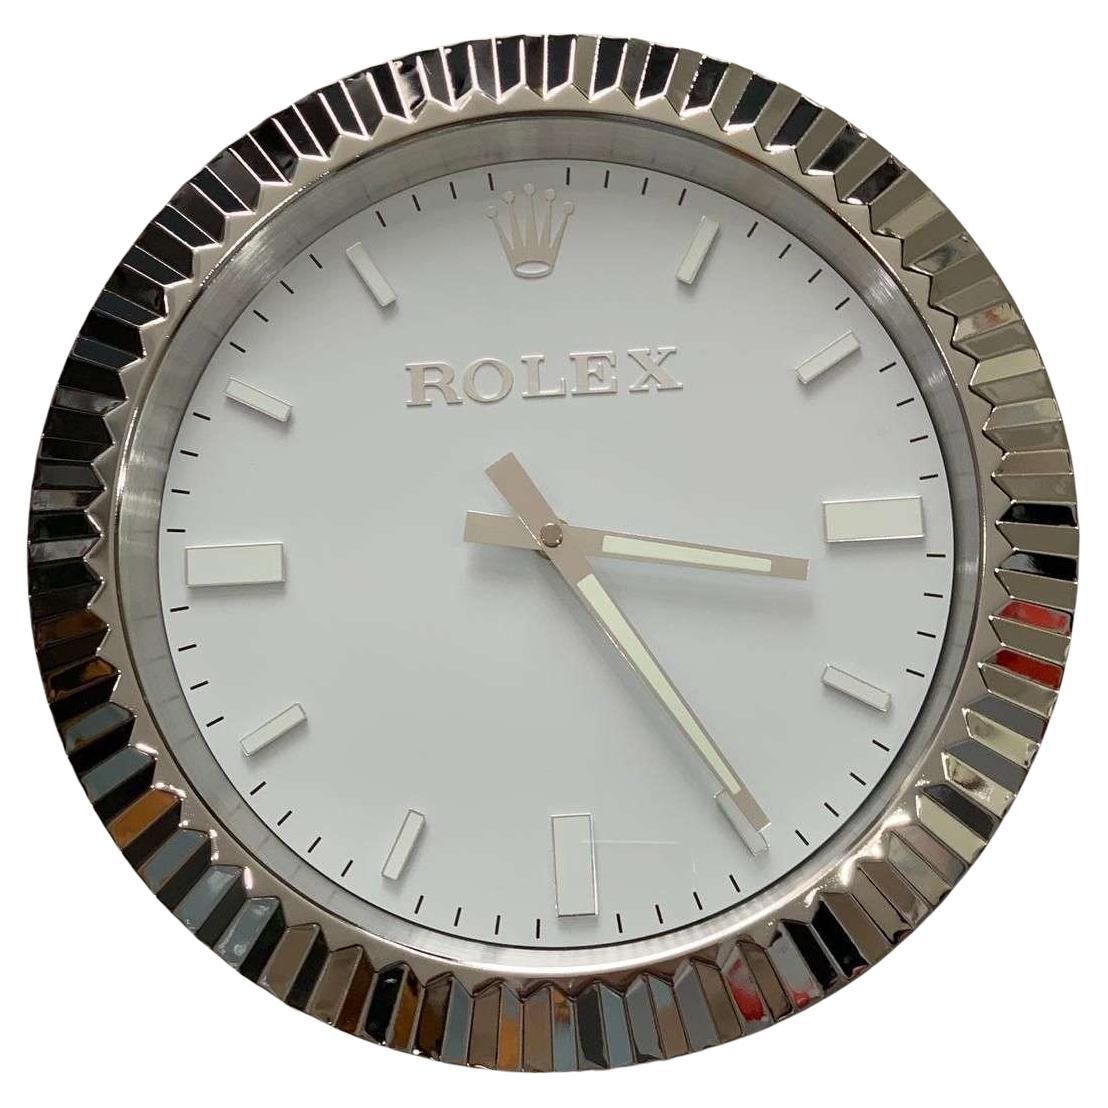 ROLEX Officially Certified Datejust Presidential Chrome Wall Clock  For Sale